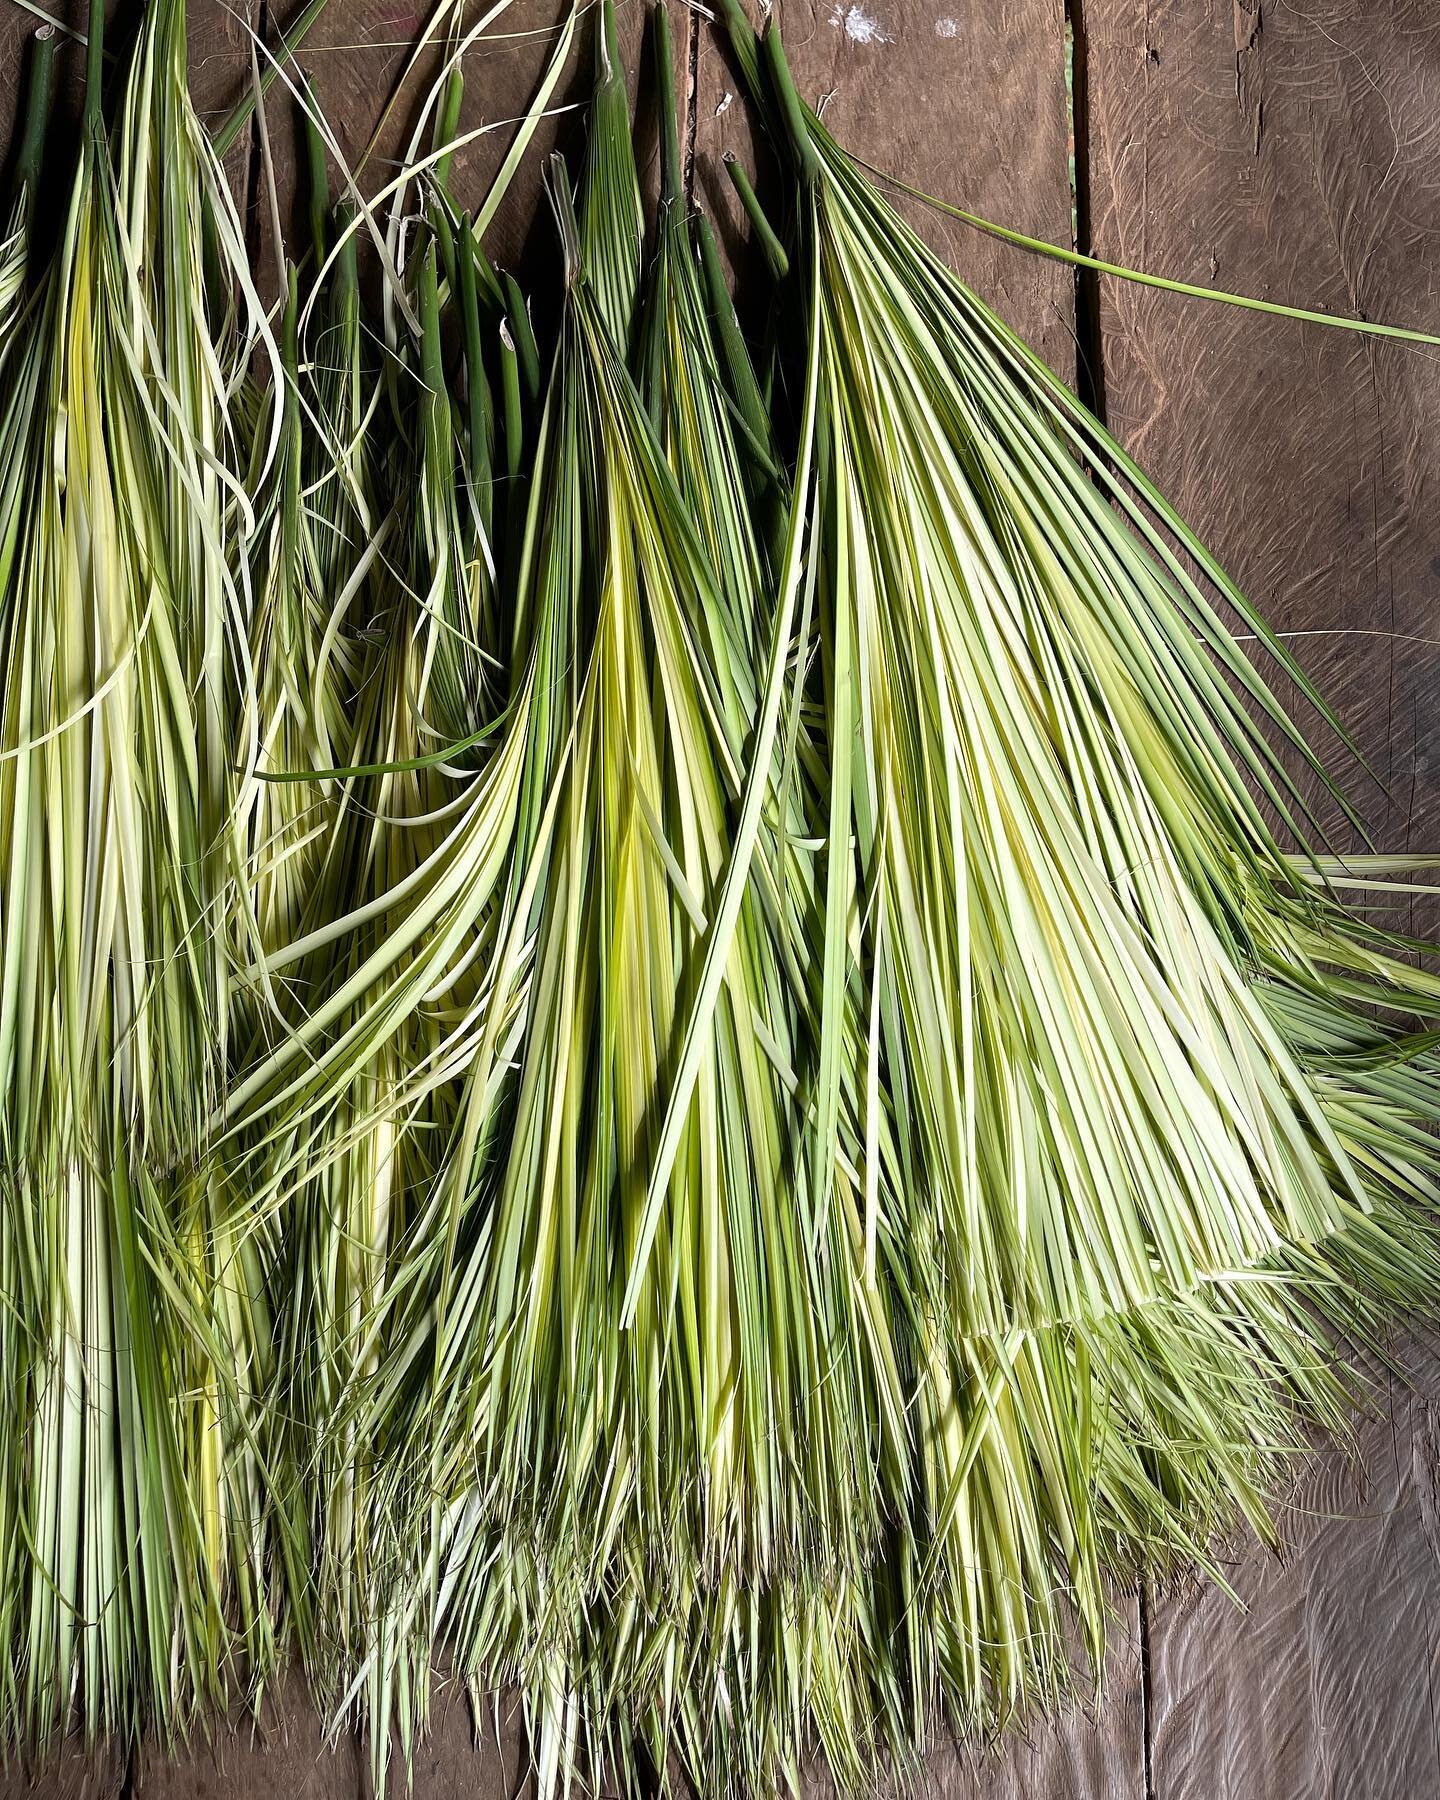 N a h u a l a ~ the bones of the basket⠀
⠀
Toquilla Palm or Nahuela as I know this plant here in Panam&aacute; as it is through weaving with the Ember&aacute; people I have come to know her with deeper intimacy. These are the young fronds harvested w